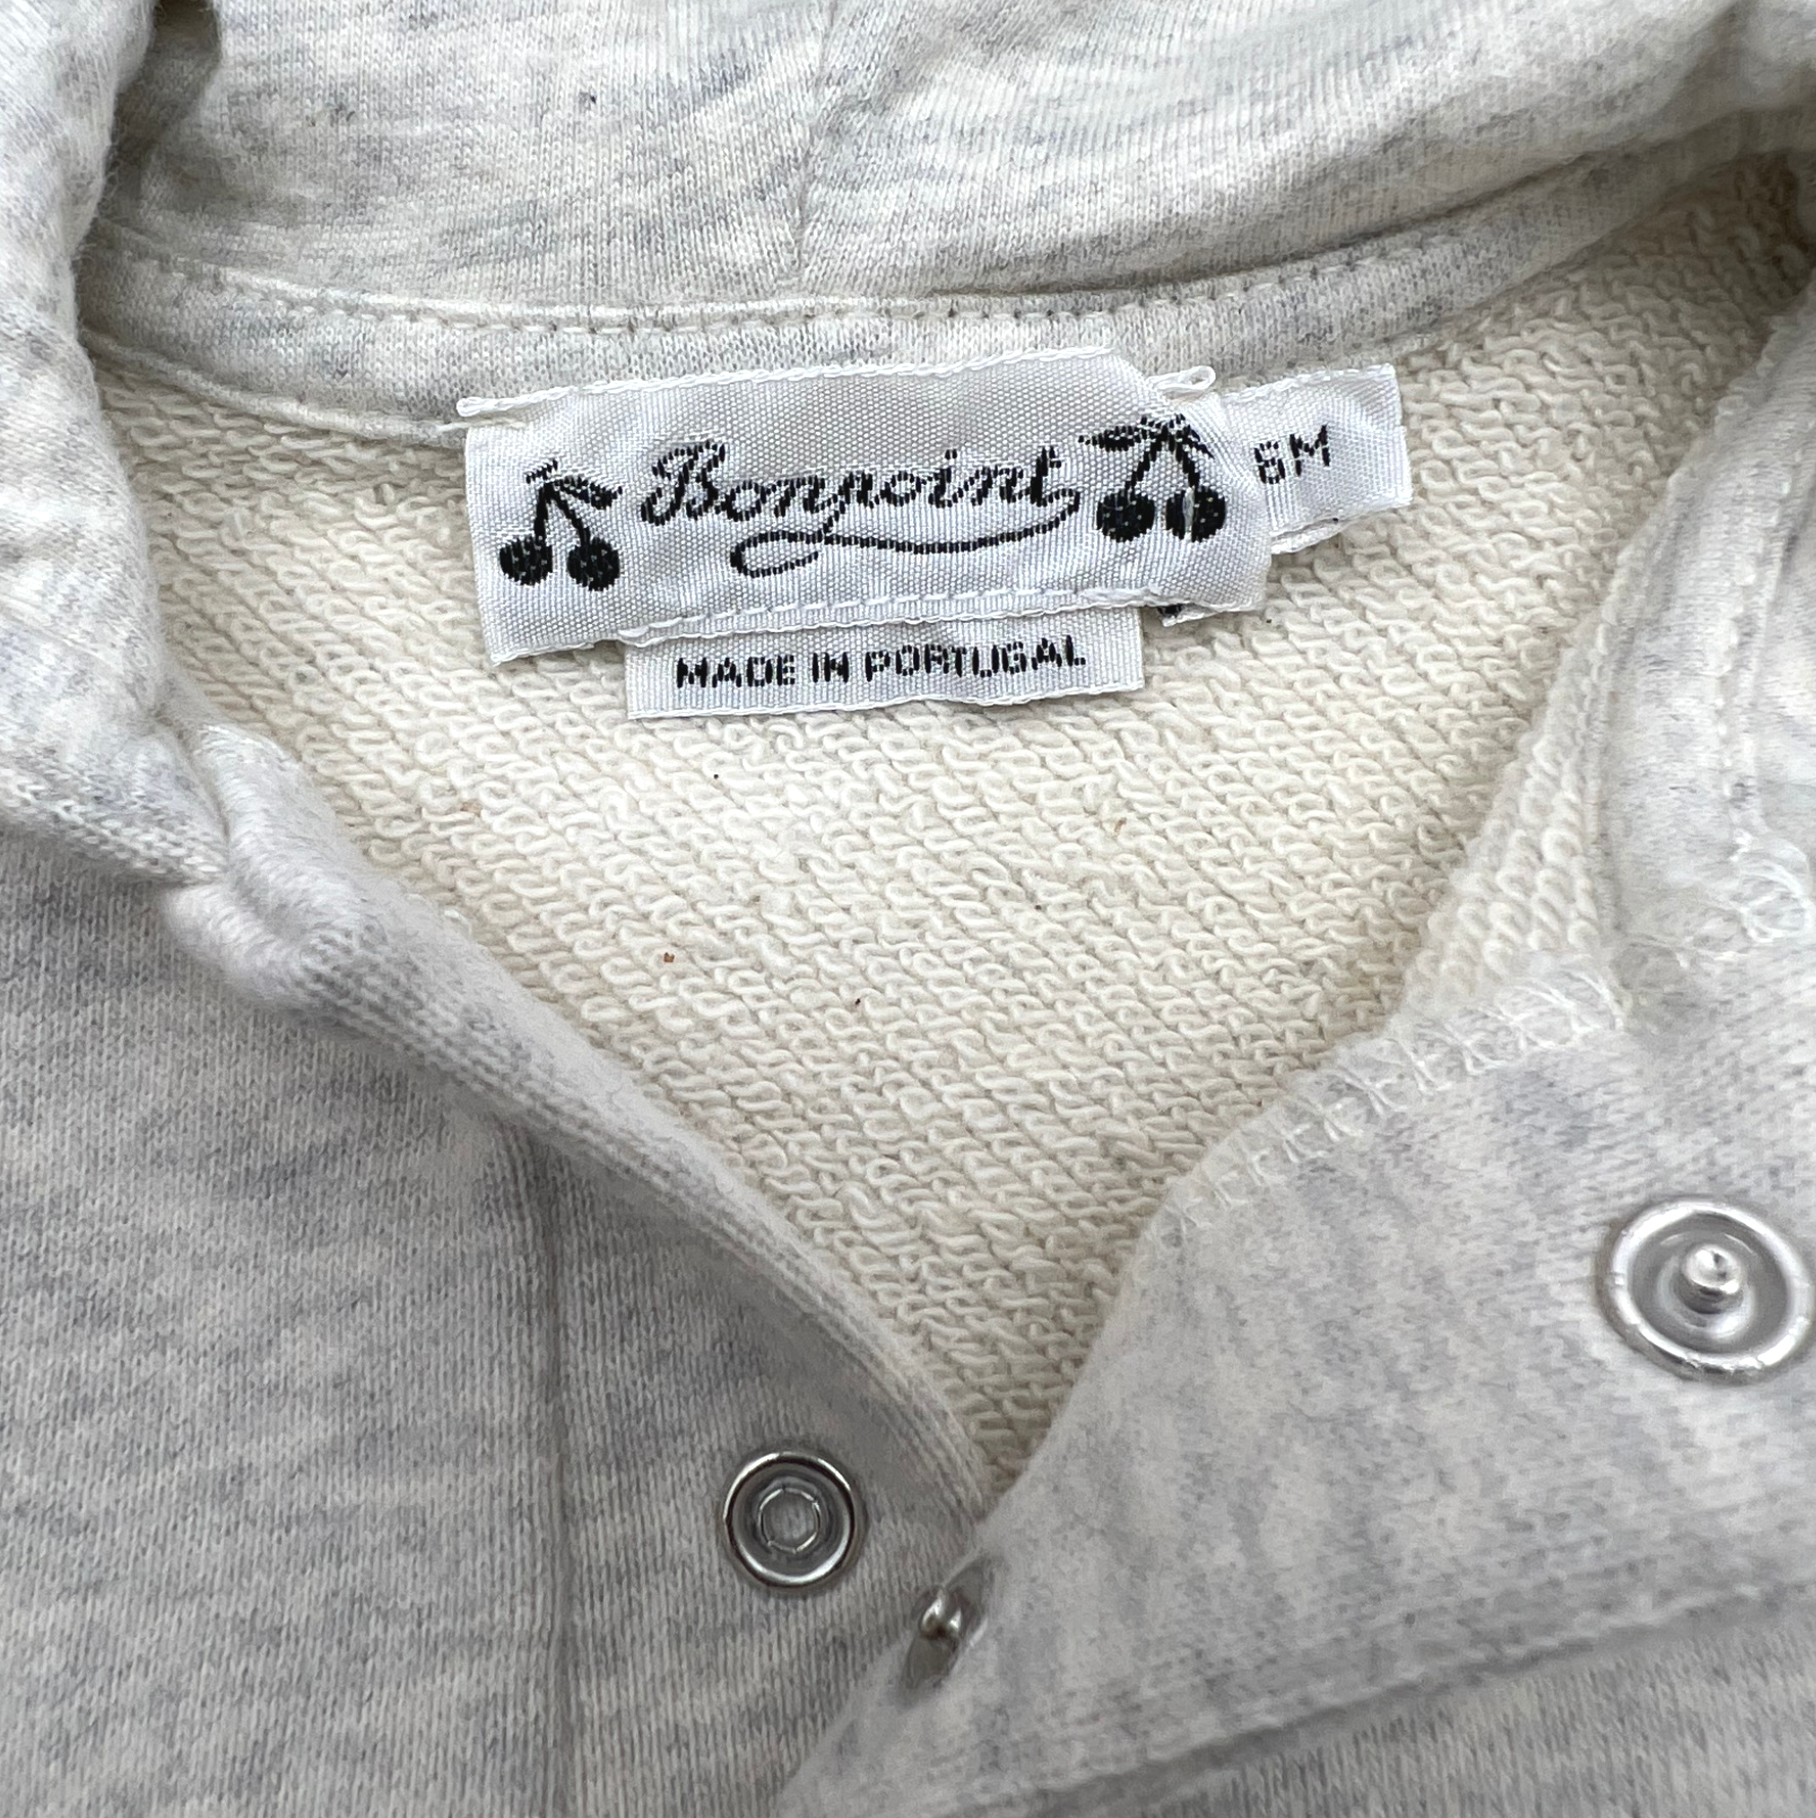 BONPOINT - Beige "Bonpoint Family" hoodie on the back - 6 months